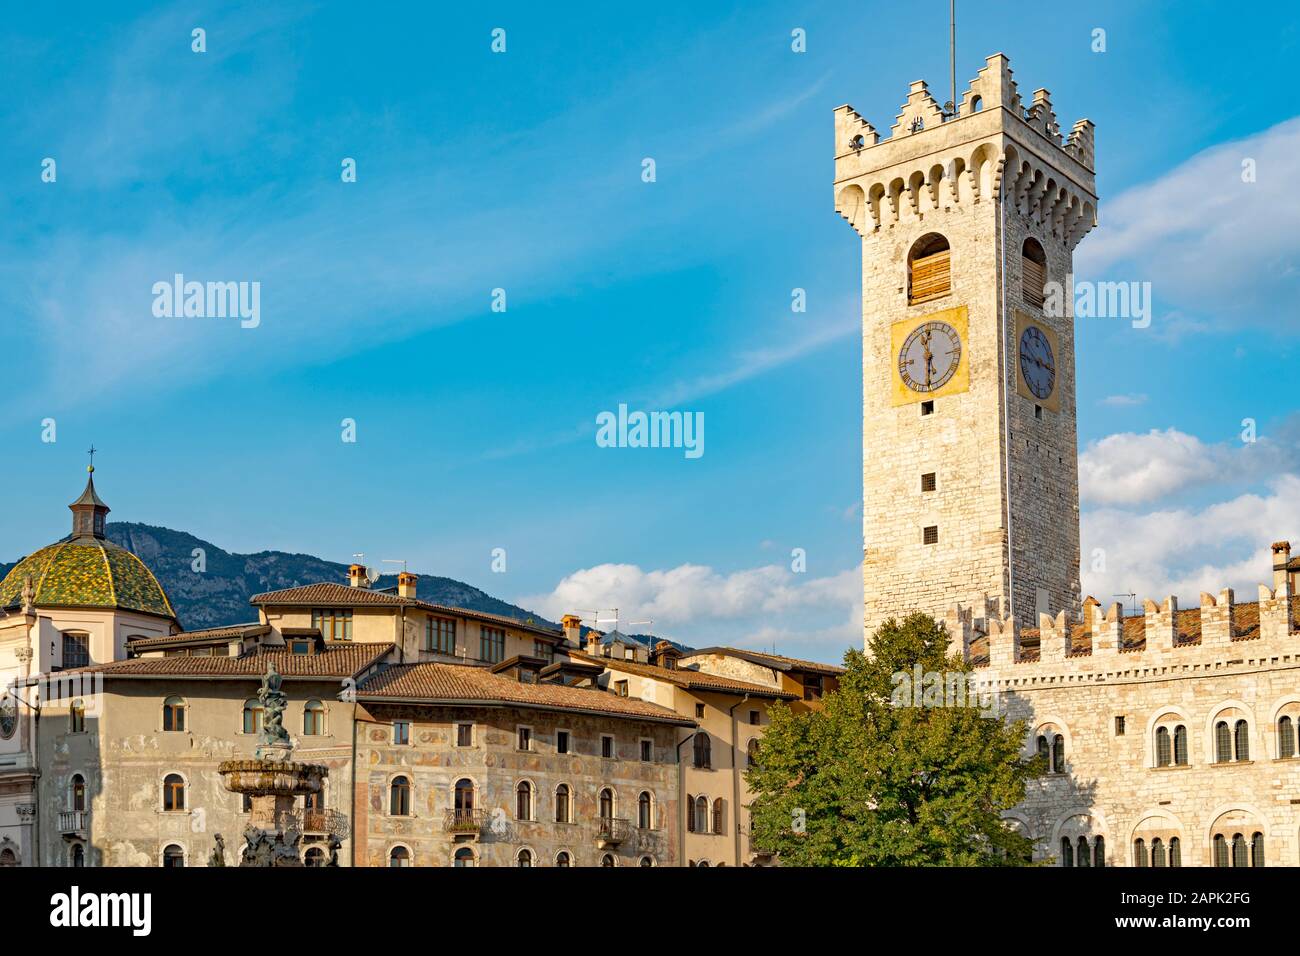 Main square in Trento, Trentino, Italy, Piazza Duomo, with frescoed Renaissance buildings and the Late Baroque Fountain of Neptune Stock Photo